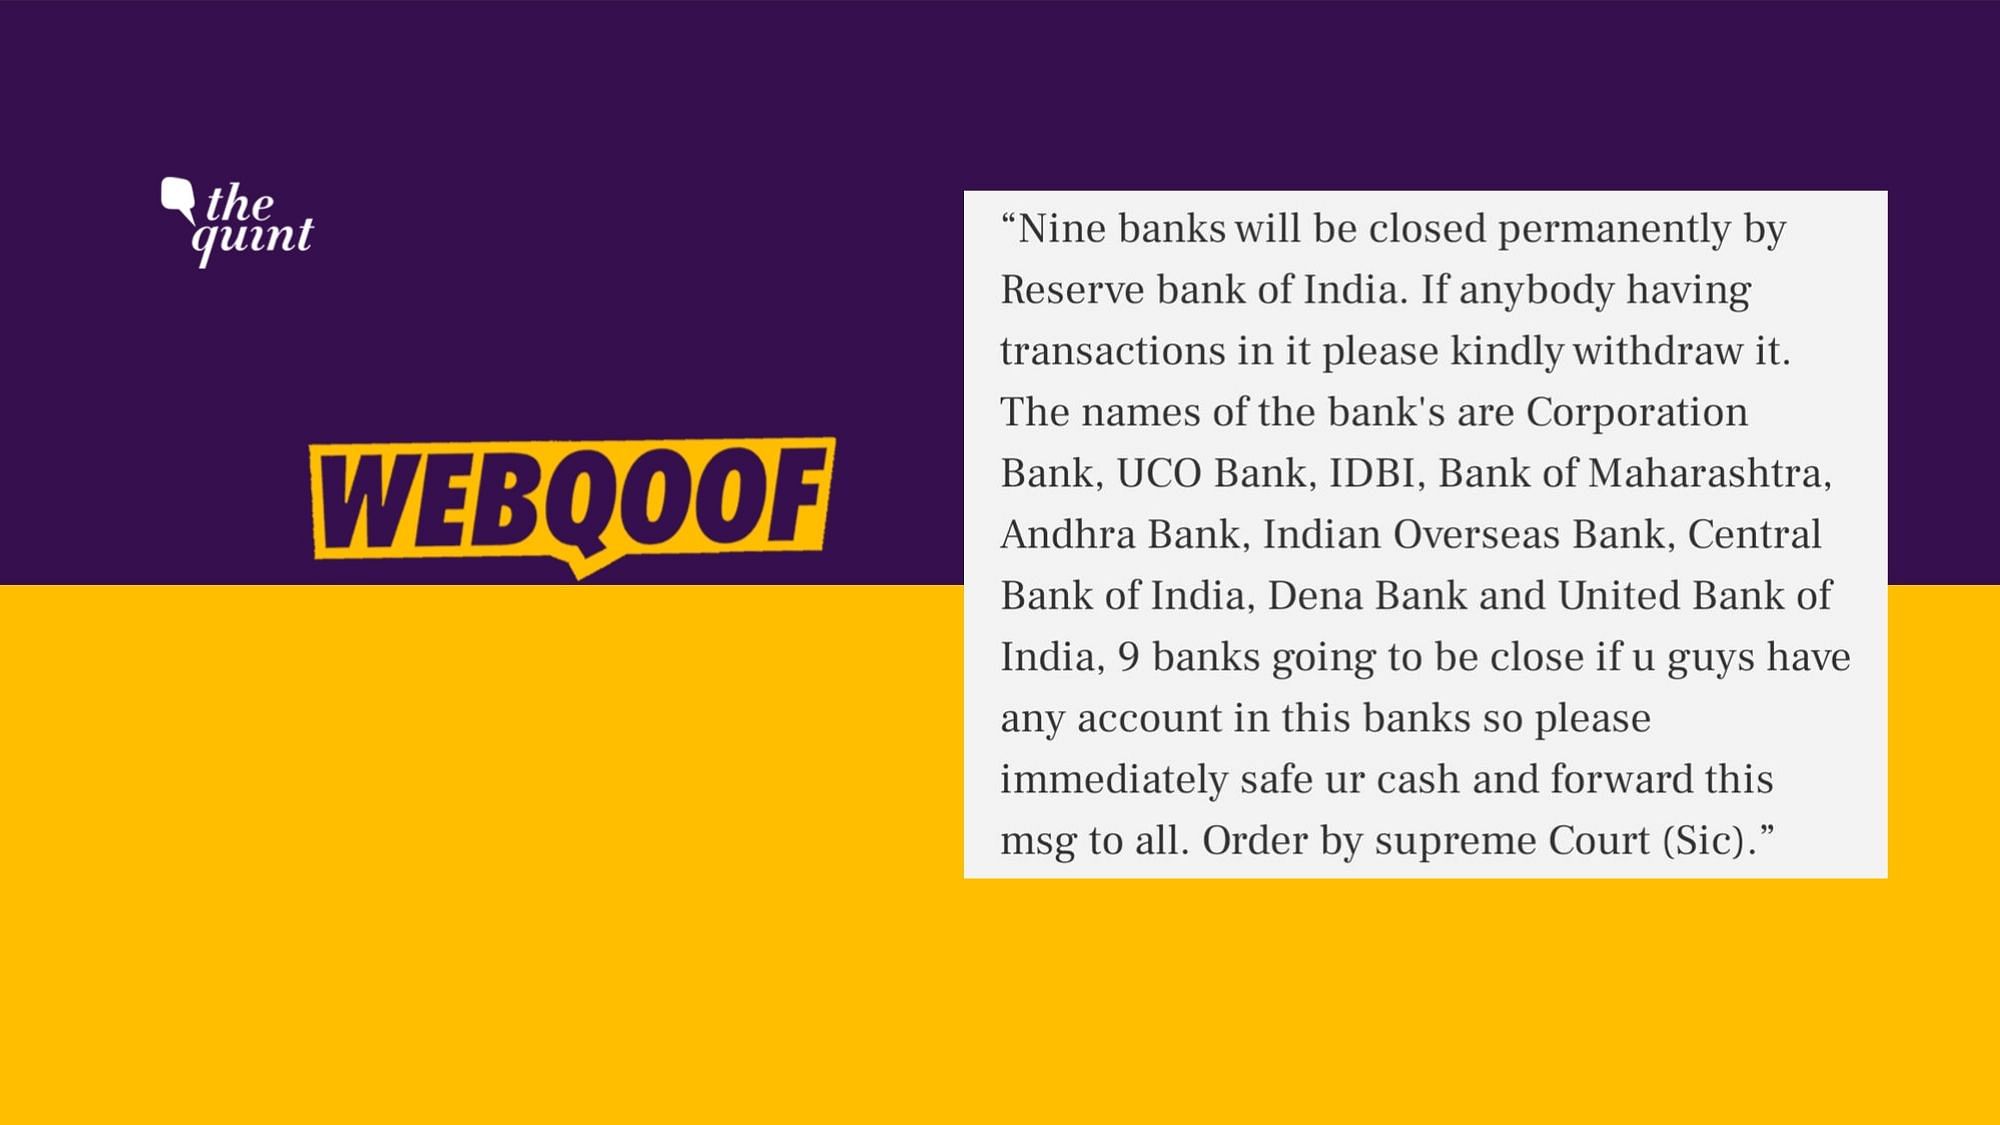 RBI is Planning to Close 9 Banks: The message in circulation about closure of the banks.